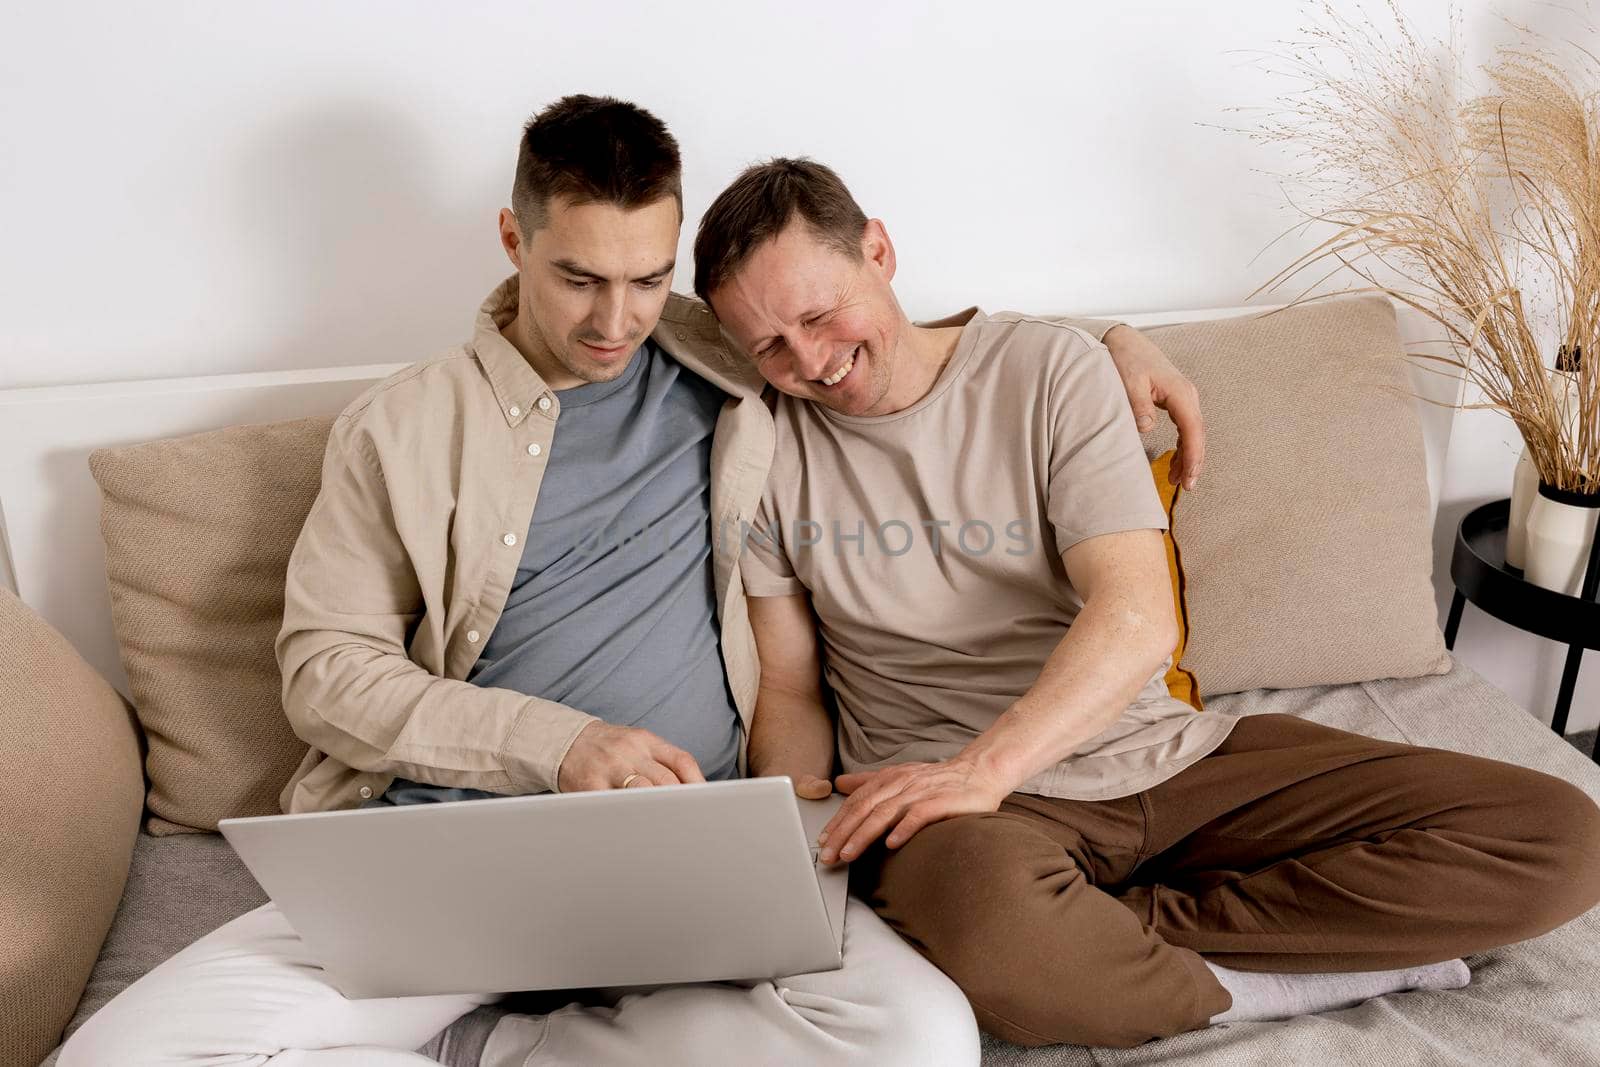 Happy gay couple with casual clothes spending time together at home and watching movie on the laptop. Two caucasian men relaxing. Homosexual relationships and alternative love. Cosy interior